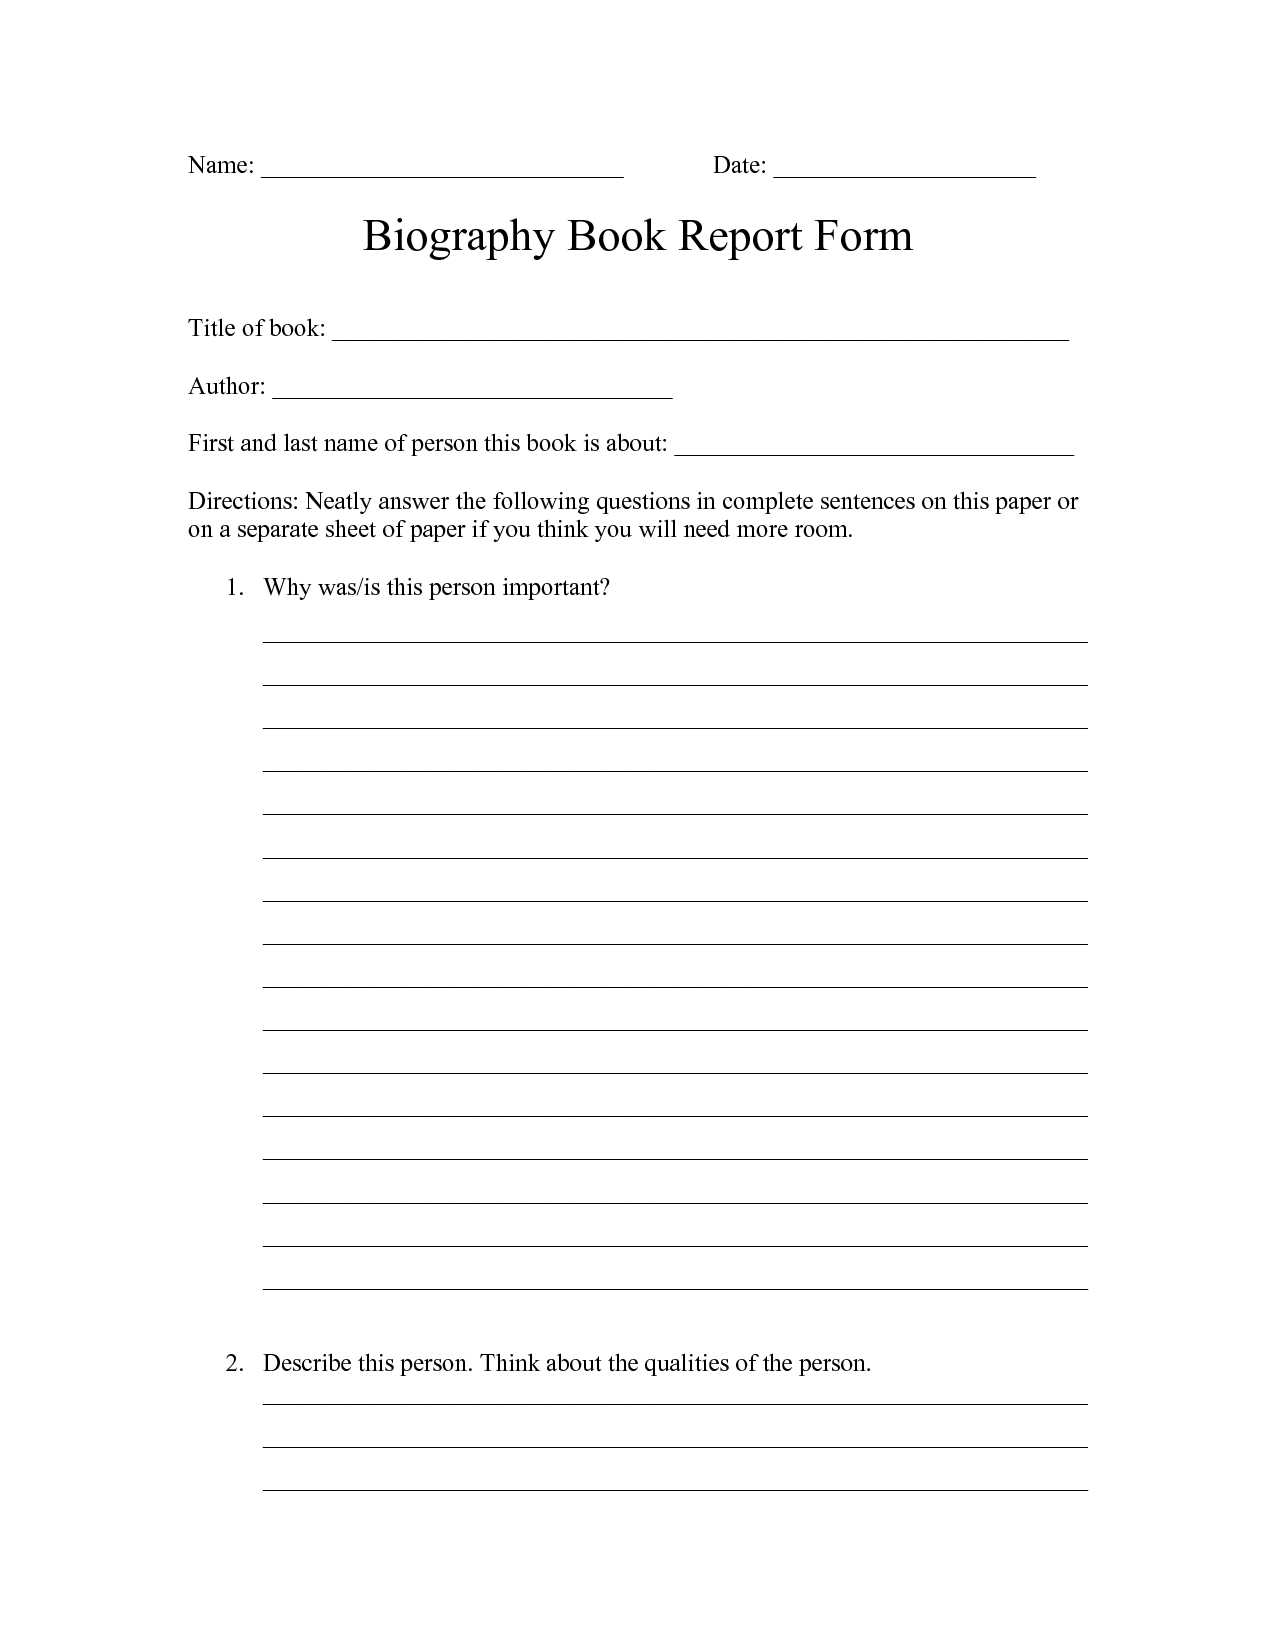 Worksheet Book Report | Printable Worksheets And Activities Intended For Biography Book Report Template